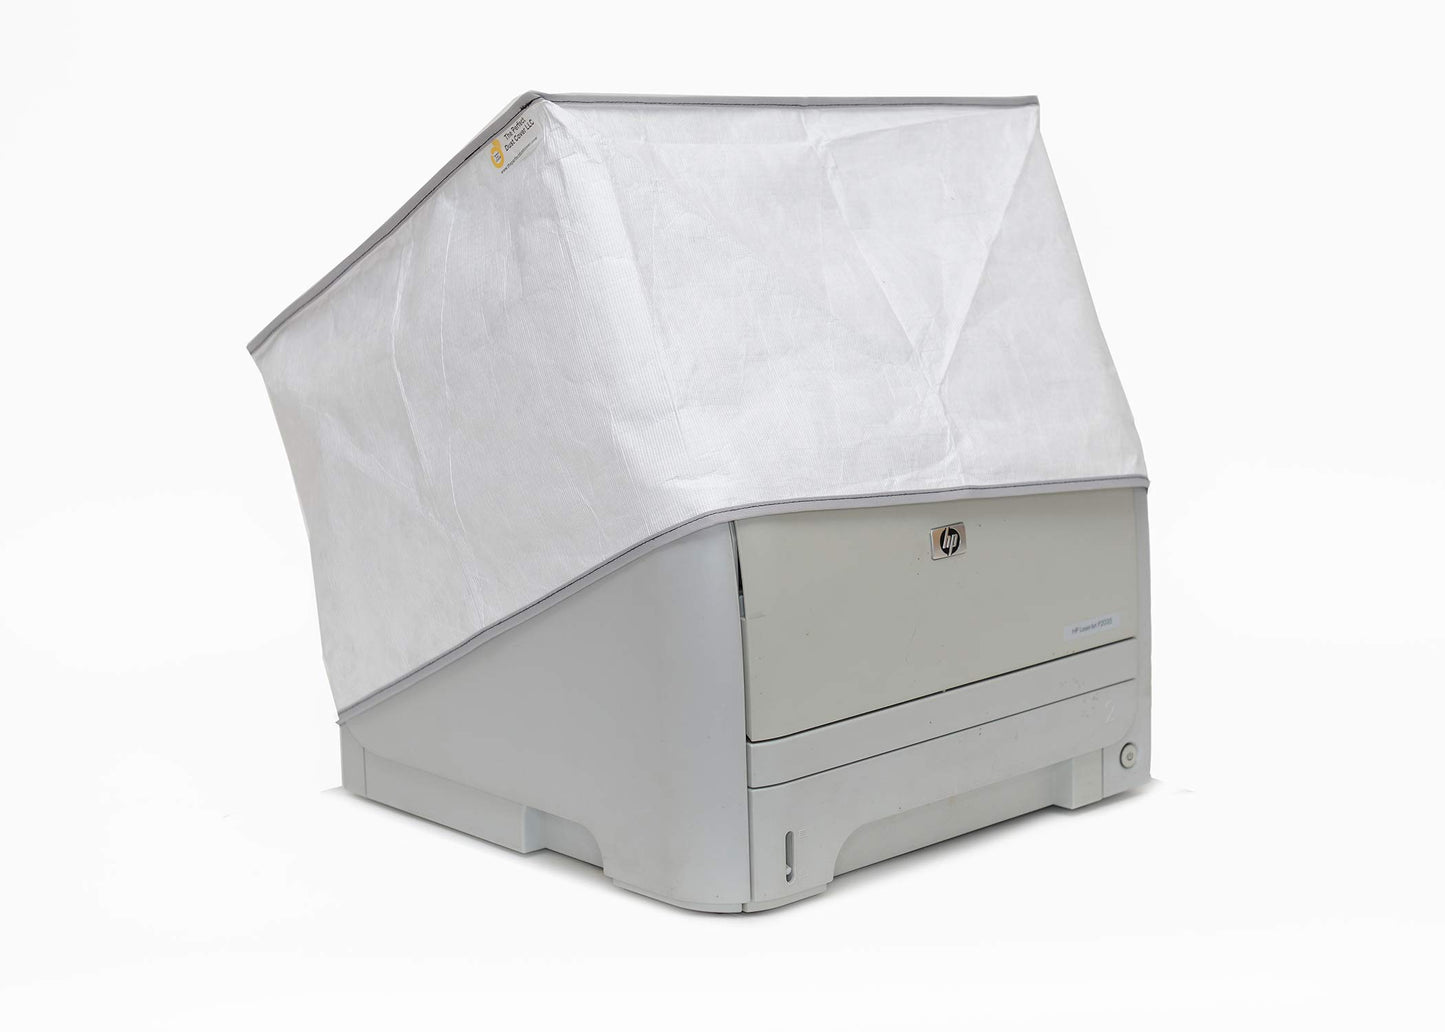 The Perfect Dust Cover, White Vinyl Cover for HP OfficeJet Pro 8028 All-in-One Wireless Printer, Anti Static Waterproof Cover, Dimensions 18.2''W x 13.4''D x 9.2''H by The Perfect Dust Cover LLC